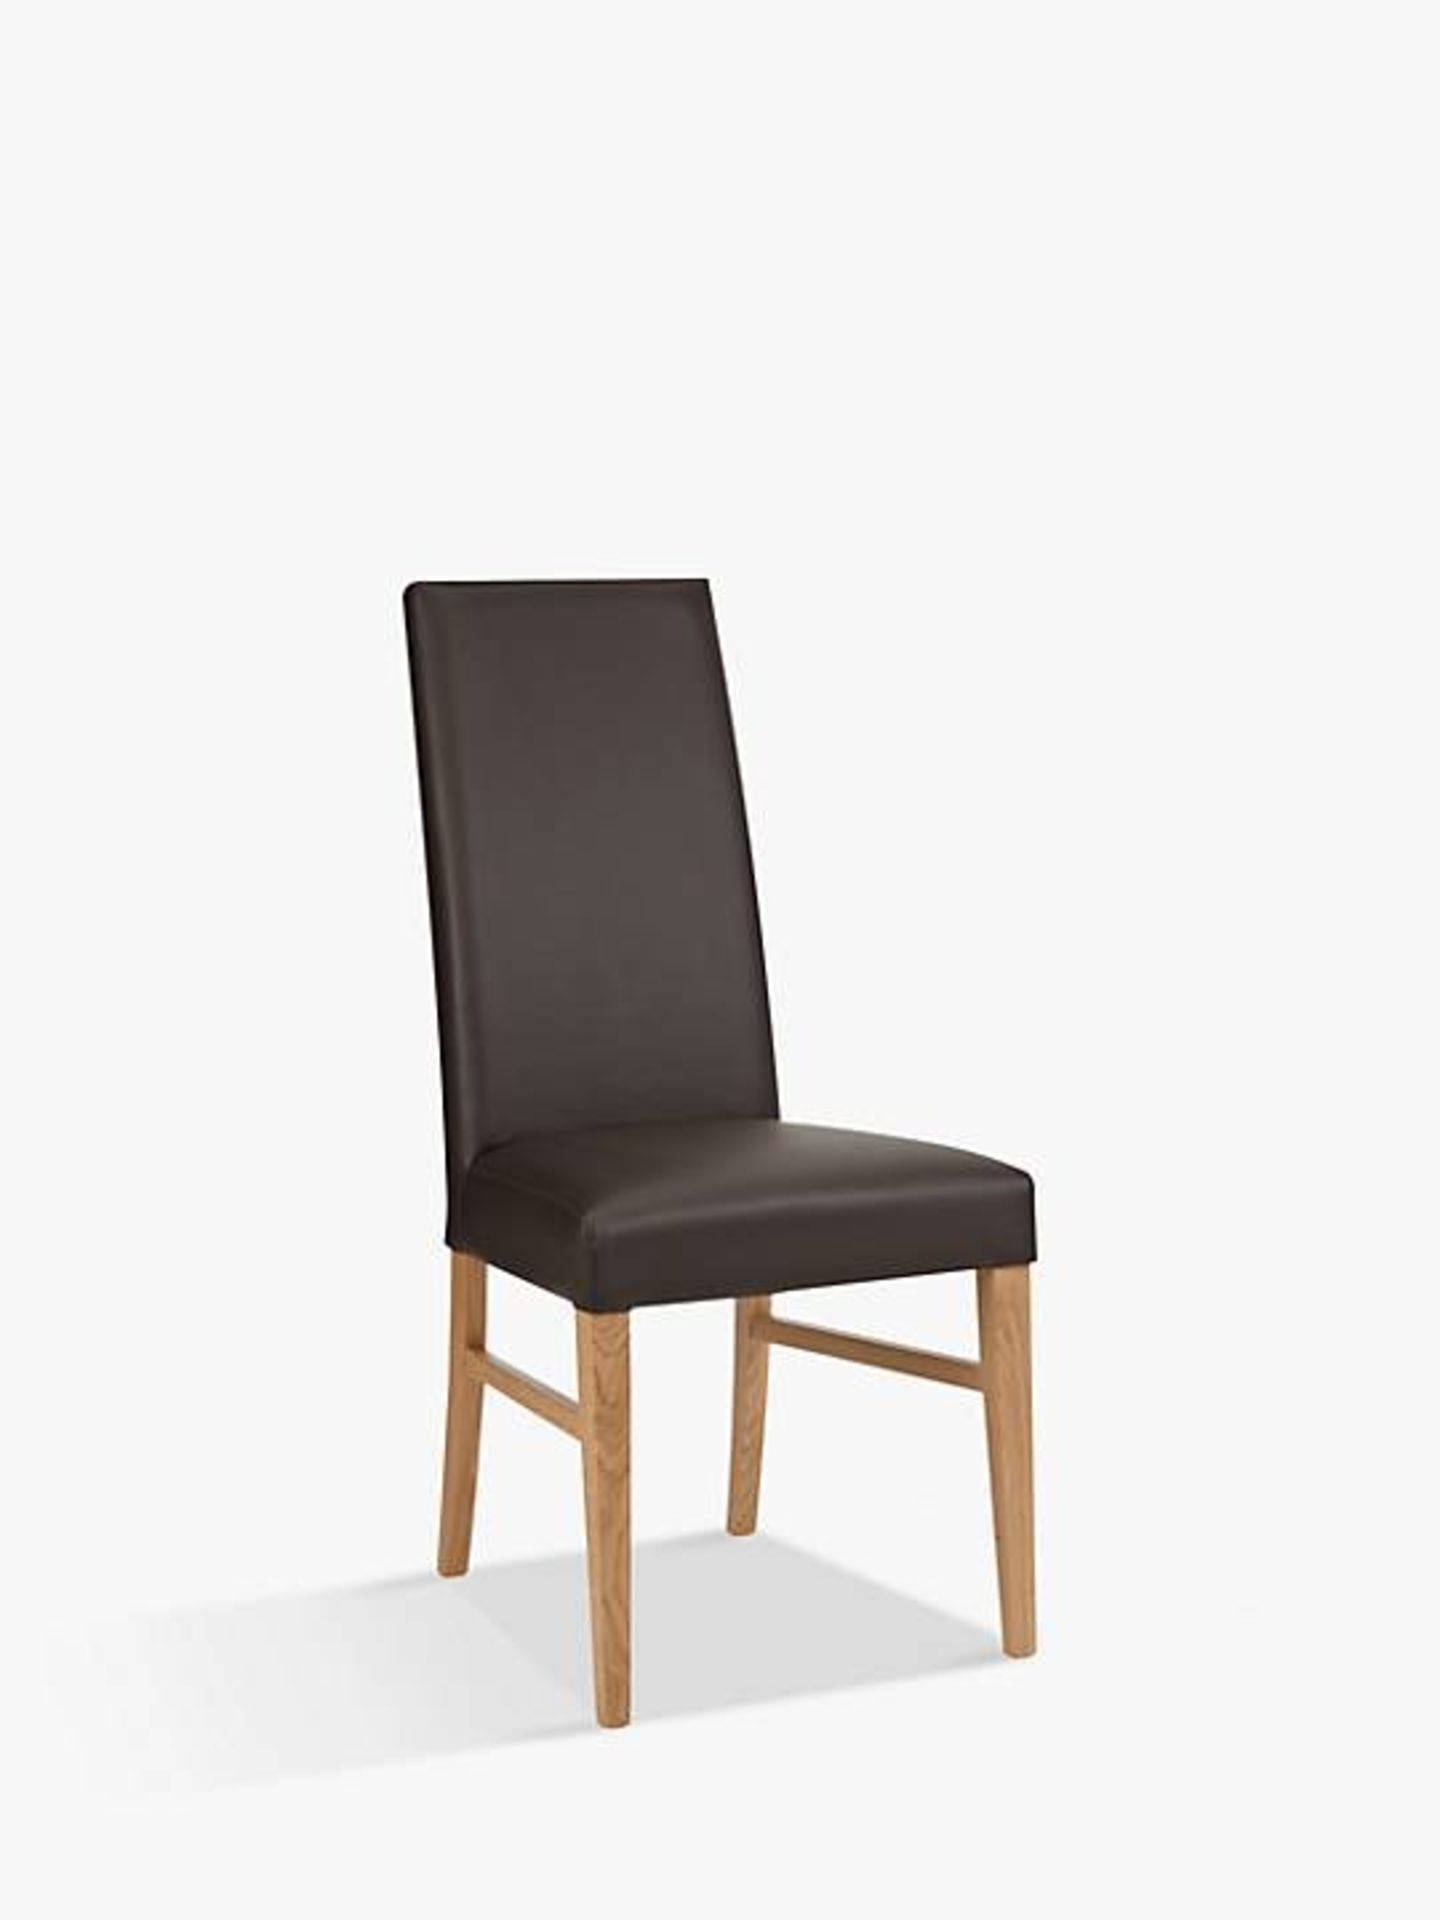 P002908546 John Lewis & Partners Vanessa Leather Dining Chair